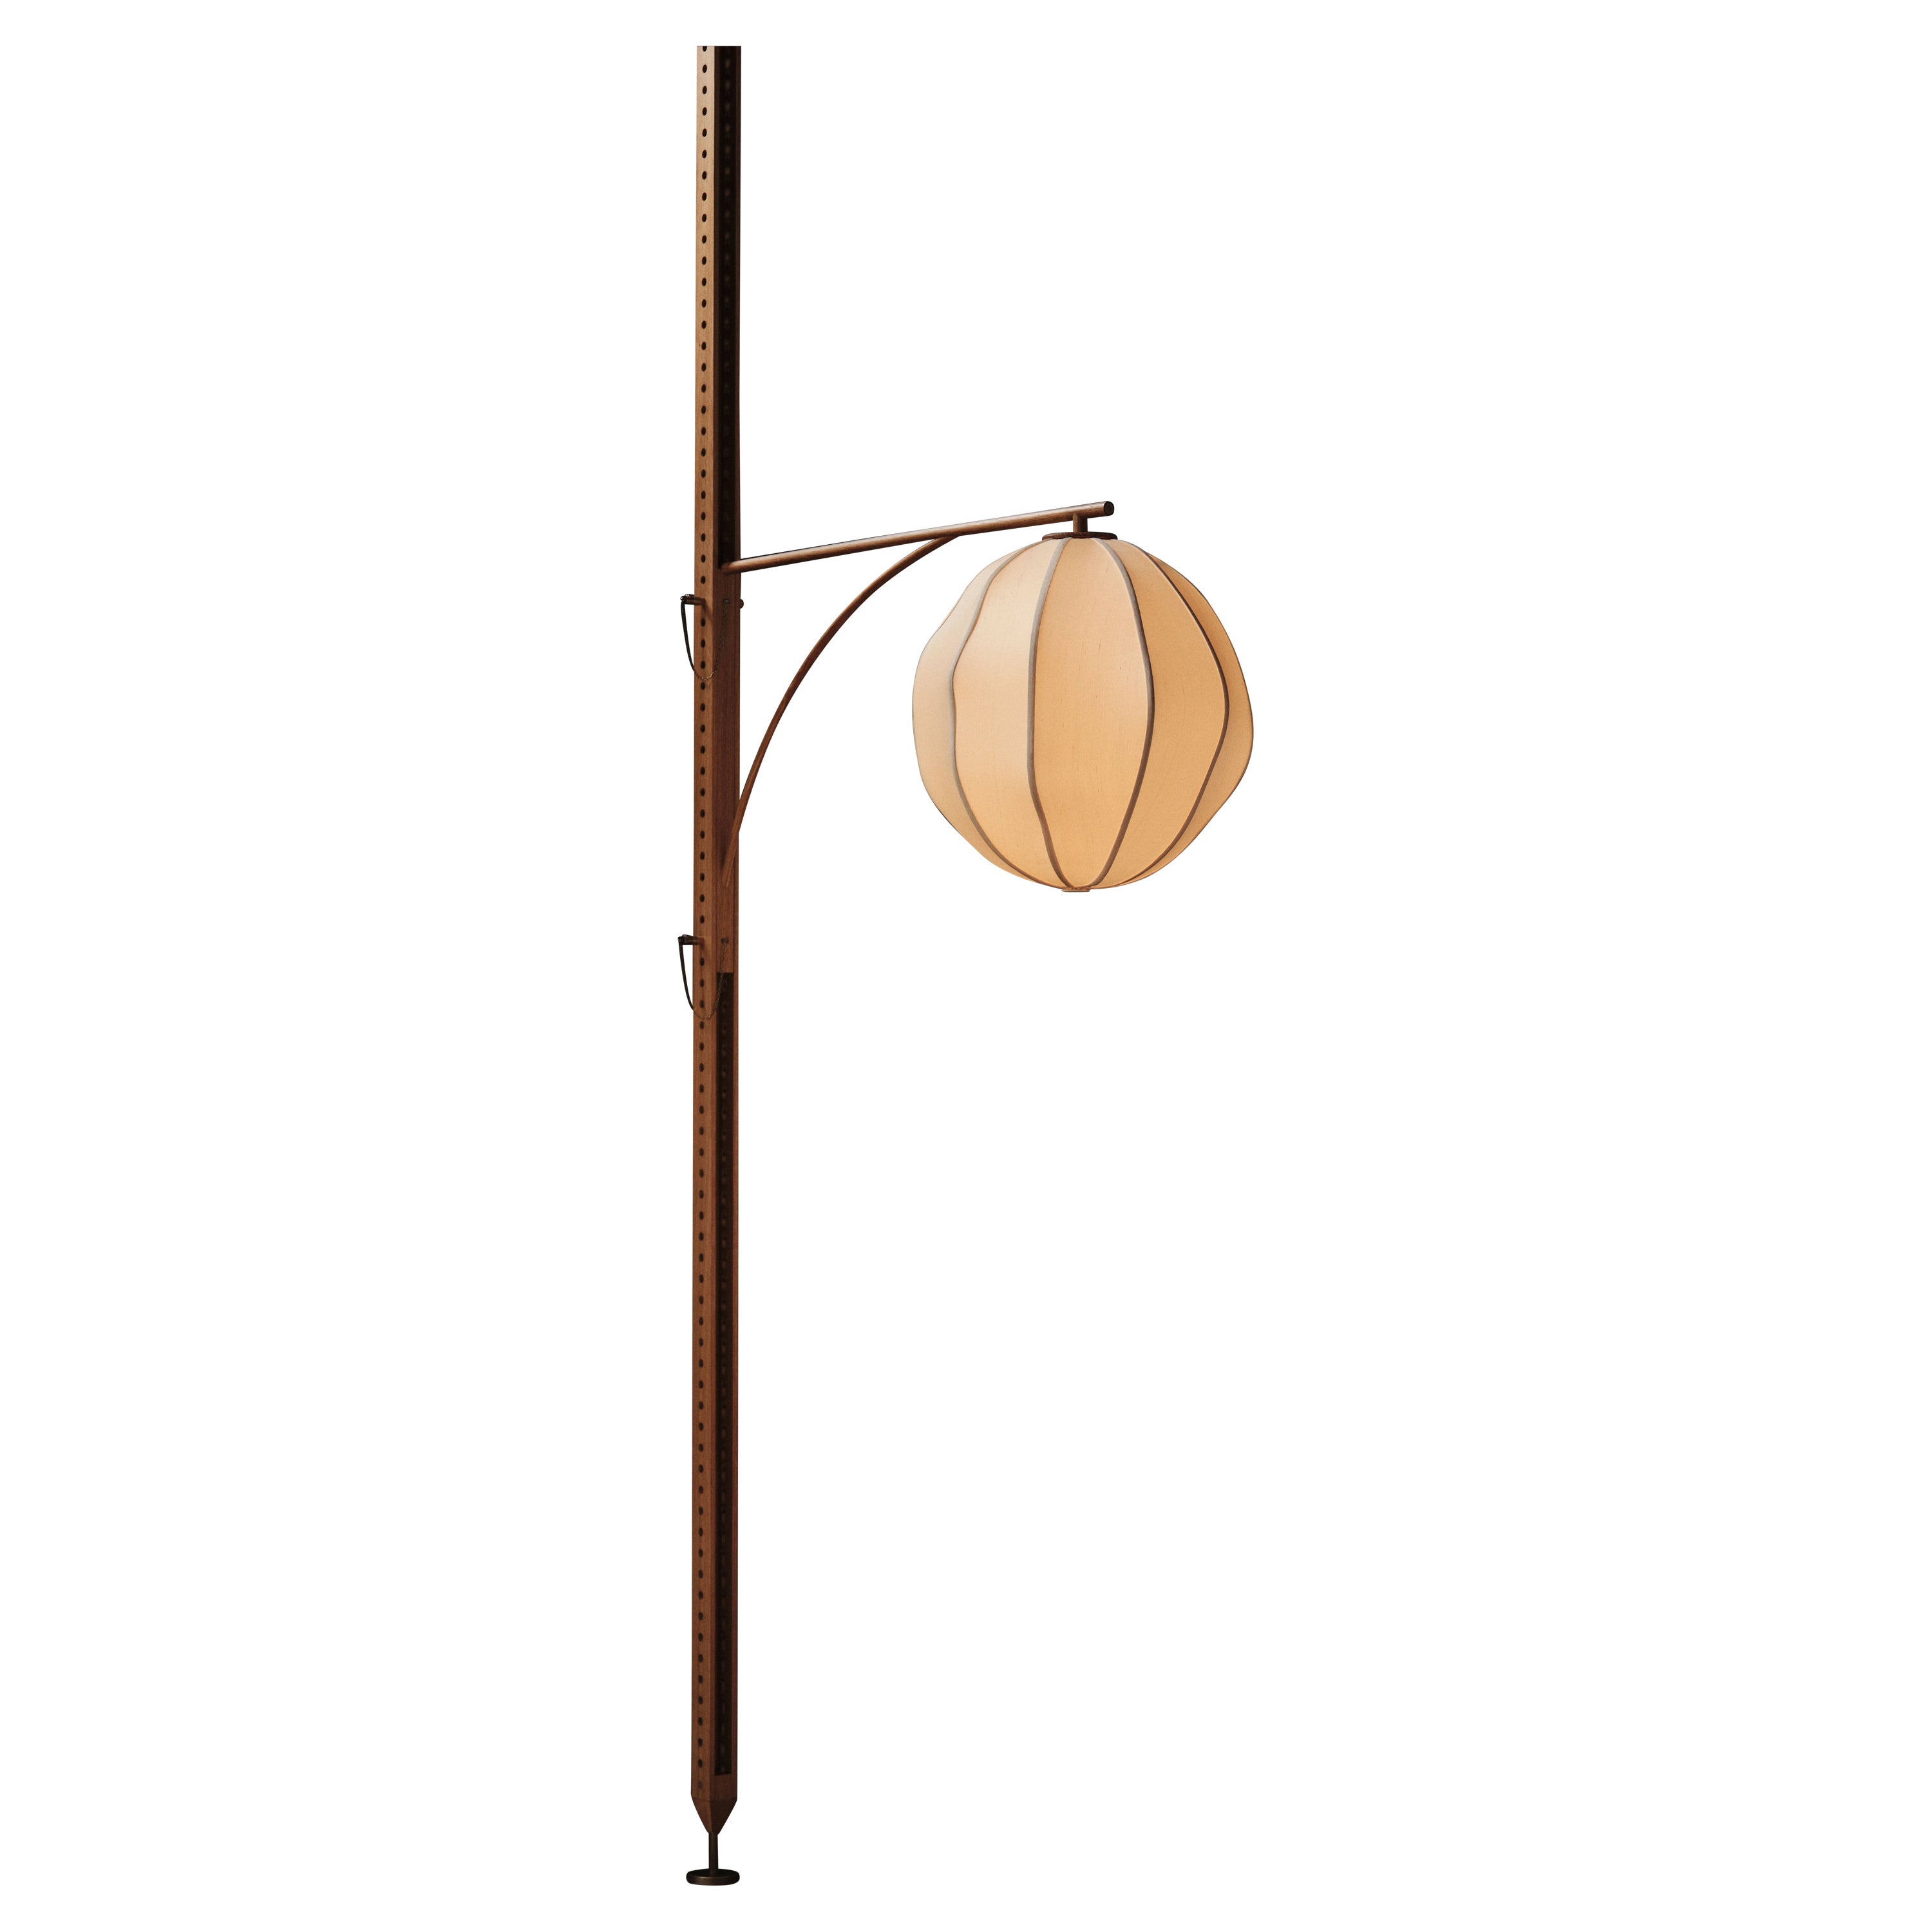 Anna Karlin Mulberry Globe Floor-to-Ceiling Lamp